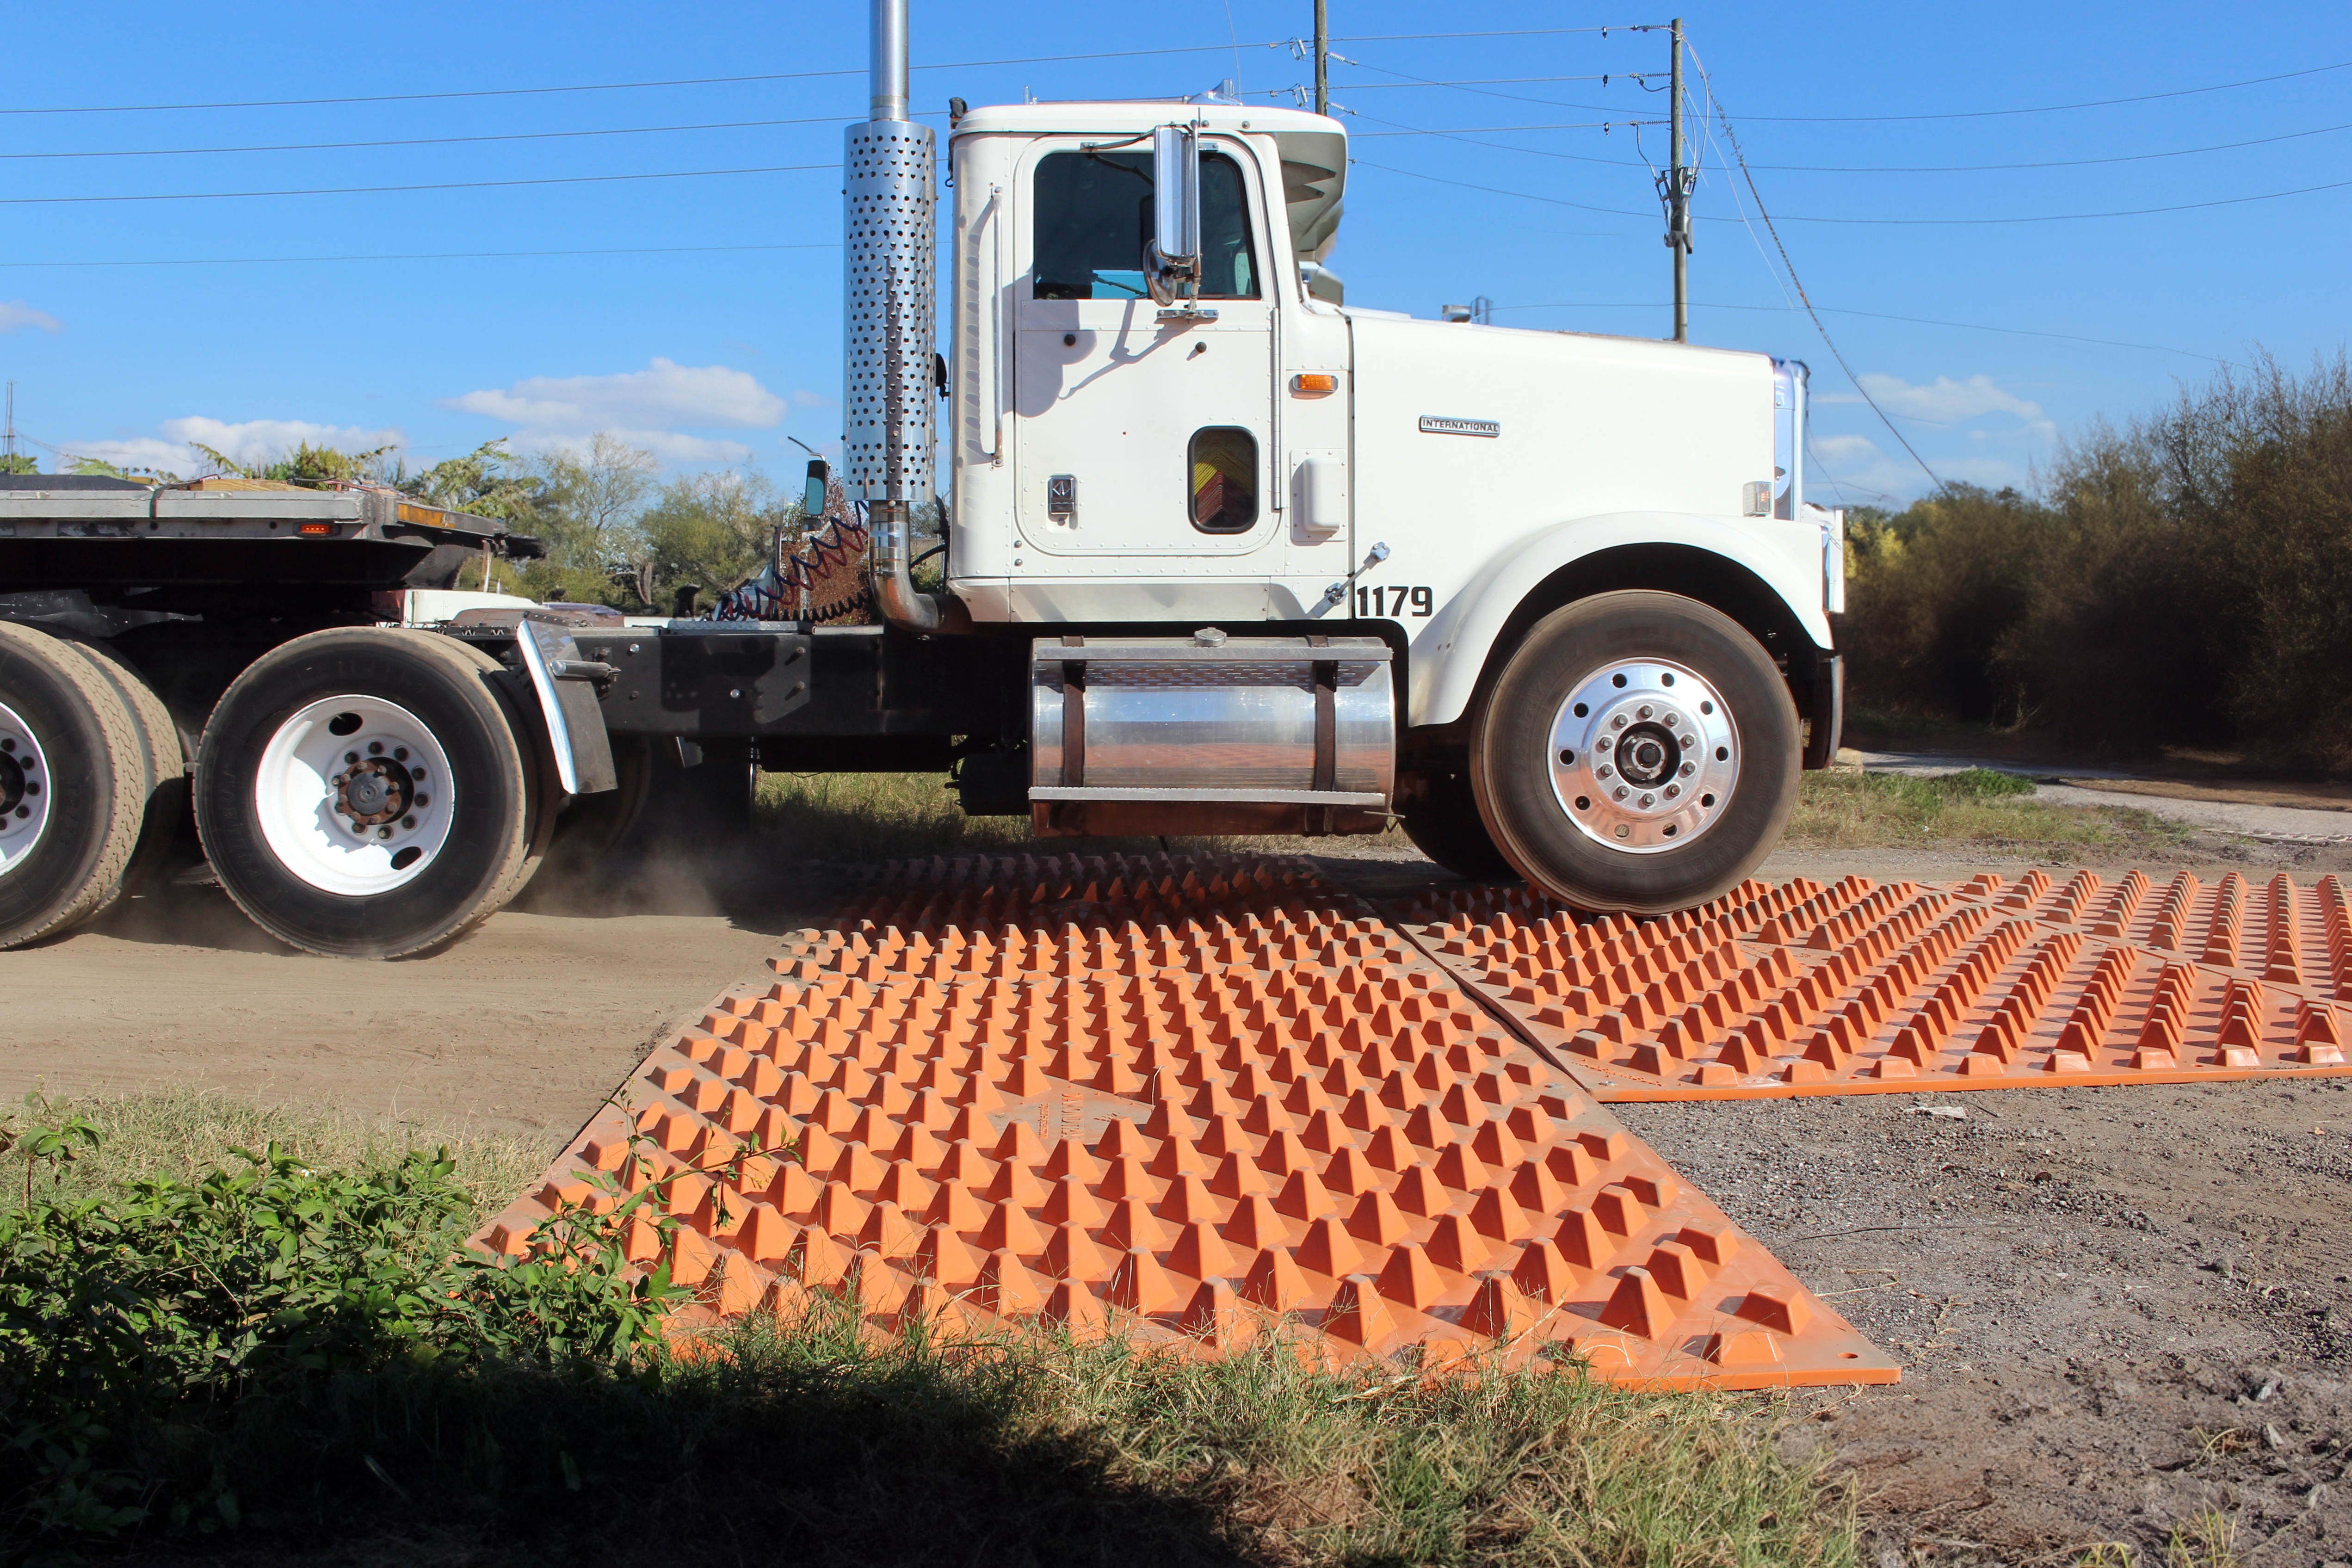 DiamontTrack Mats being used on a job-site